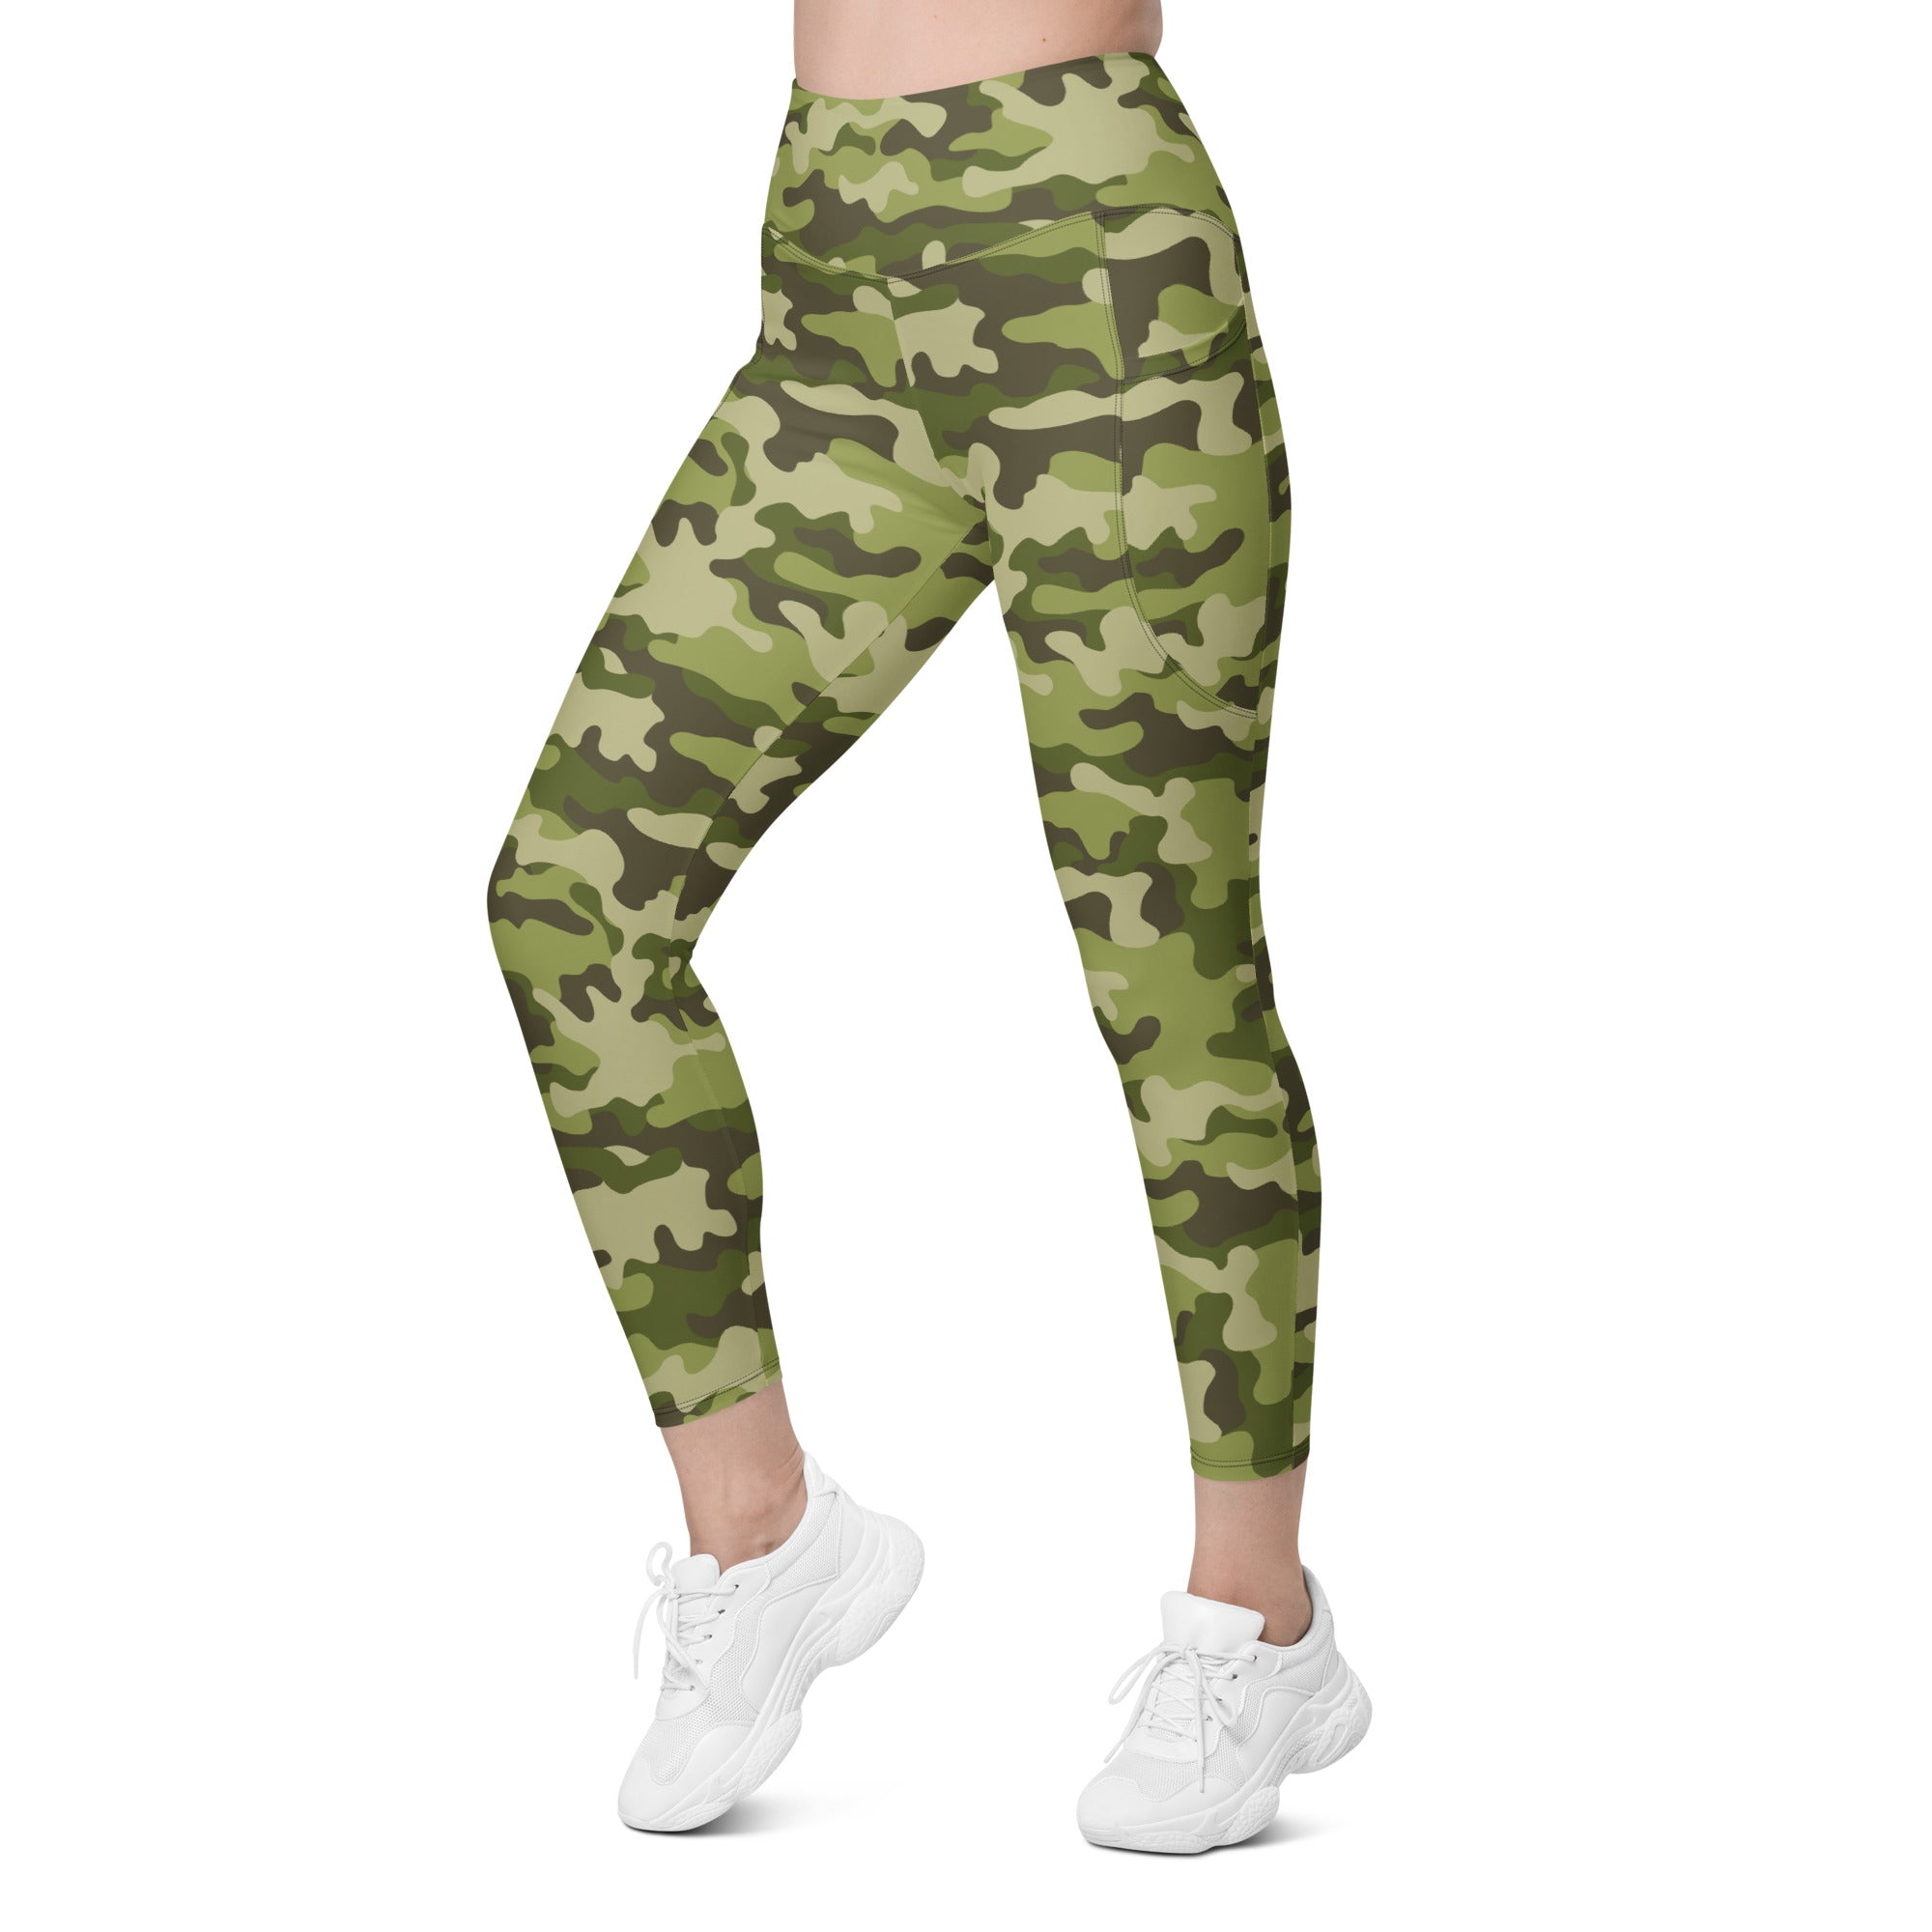 Classic Camo Leggings With Pockets